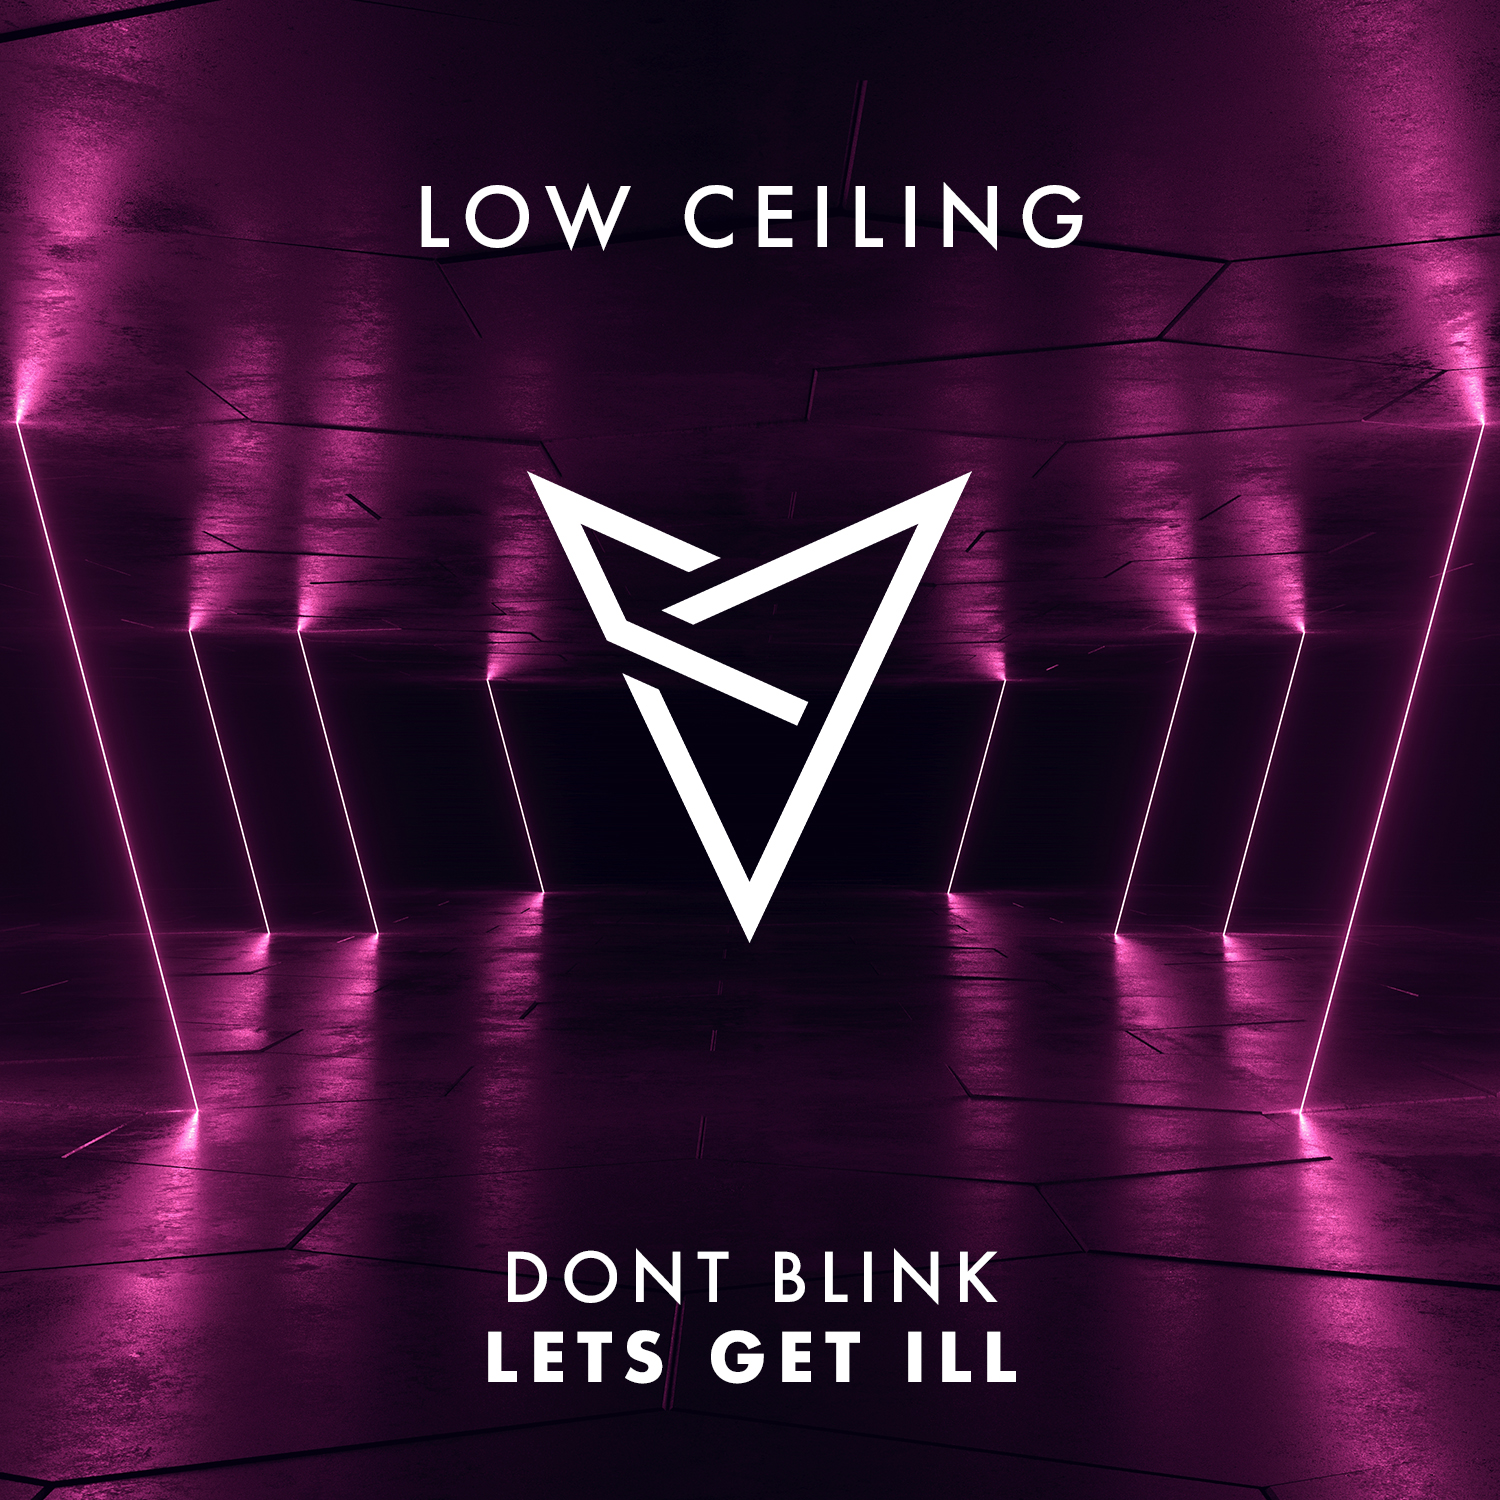 DONT BLINK - LETS GET ILL